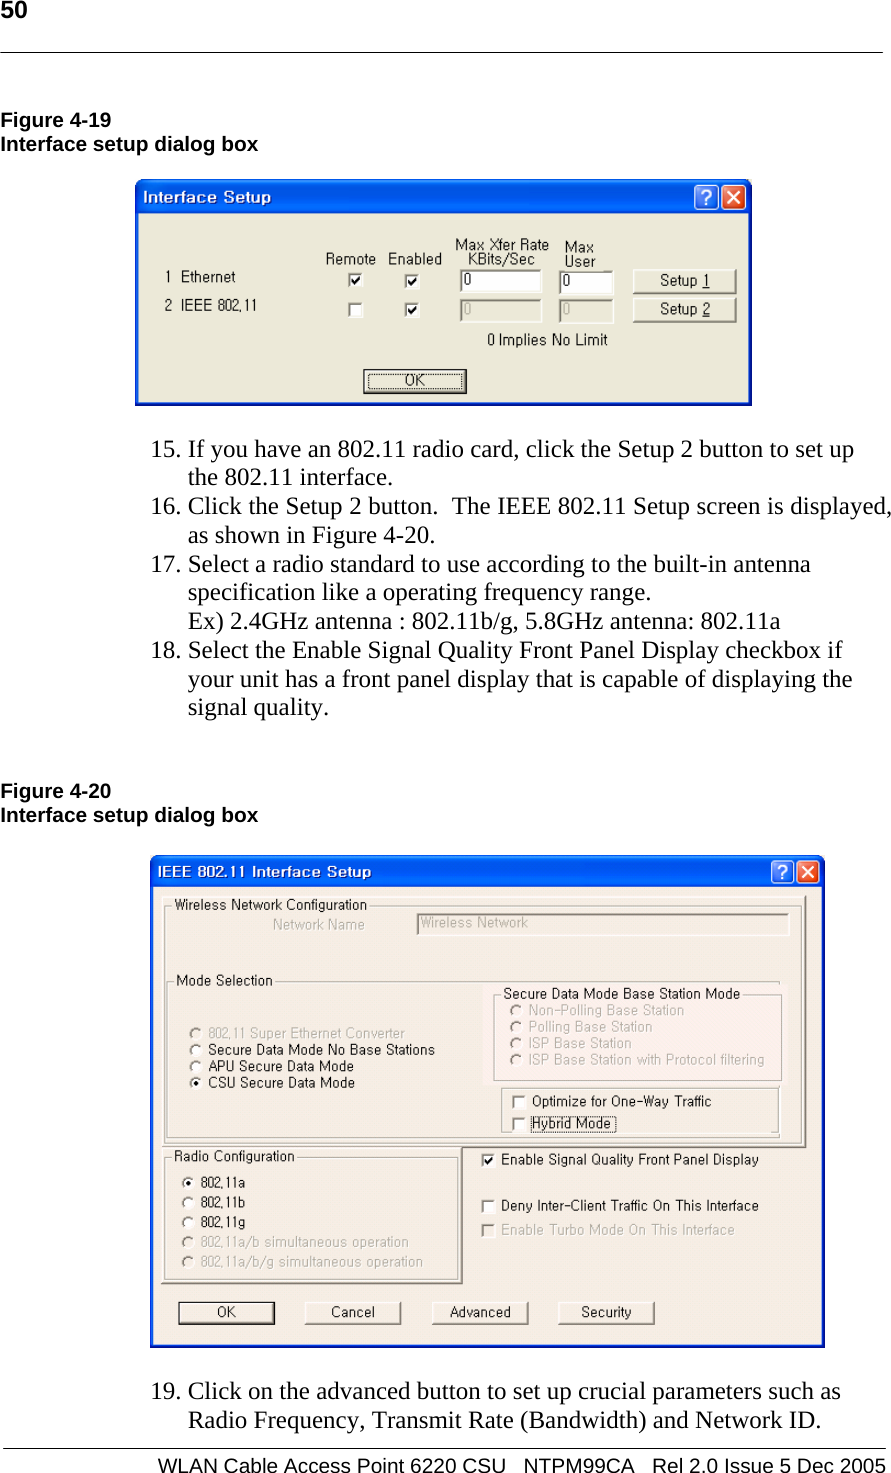   50  WLAN Cable Access Point 6220 CSU   NTPM99CA   Rel 2.0 Issue 5 Dec 2005 Figure 4-19 Interface setup dialog box    15. If you have an 802.11 radio card, click the Setup 2 button to set up the 802.11 interface. 16. Click the Setup 2 button.  The IEEE 802.11 Setup screen is displayed, as shown in Figure 4-20. 17. Select a radio standard to use according to the built-in antenna specification like a operating frequency range.  Ex) 2.4GHz antenna : 802.11b/g, 5.8GHz antenna: 802.11a  18. Select the Enable Signal Quality Front Panel Display checkbox if your unit has a front panel display that is capable of displaying the signal quality.   Figure 4-20 Interface setup dialog box    19. Click on the advanced button to set up crucial parameters such as Radio Frequency, Transmit Rate (Bandwidth) and Network ID. 